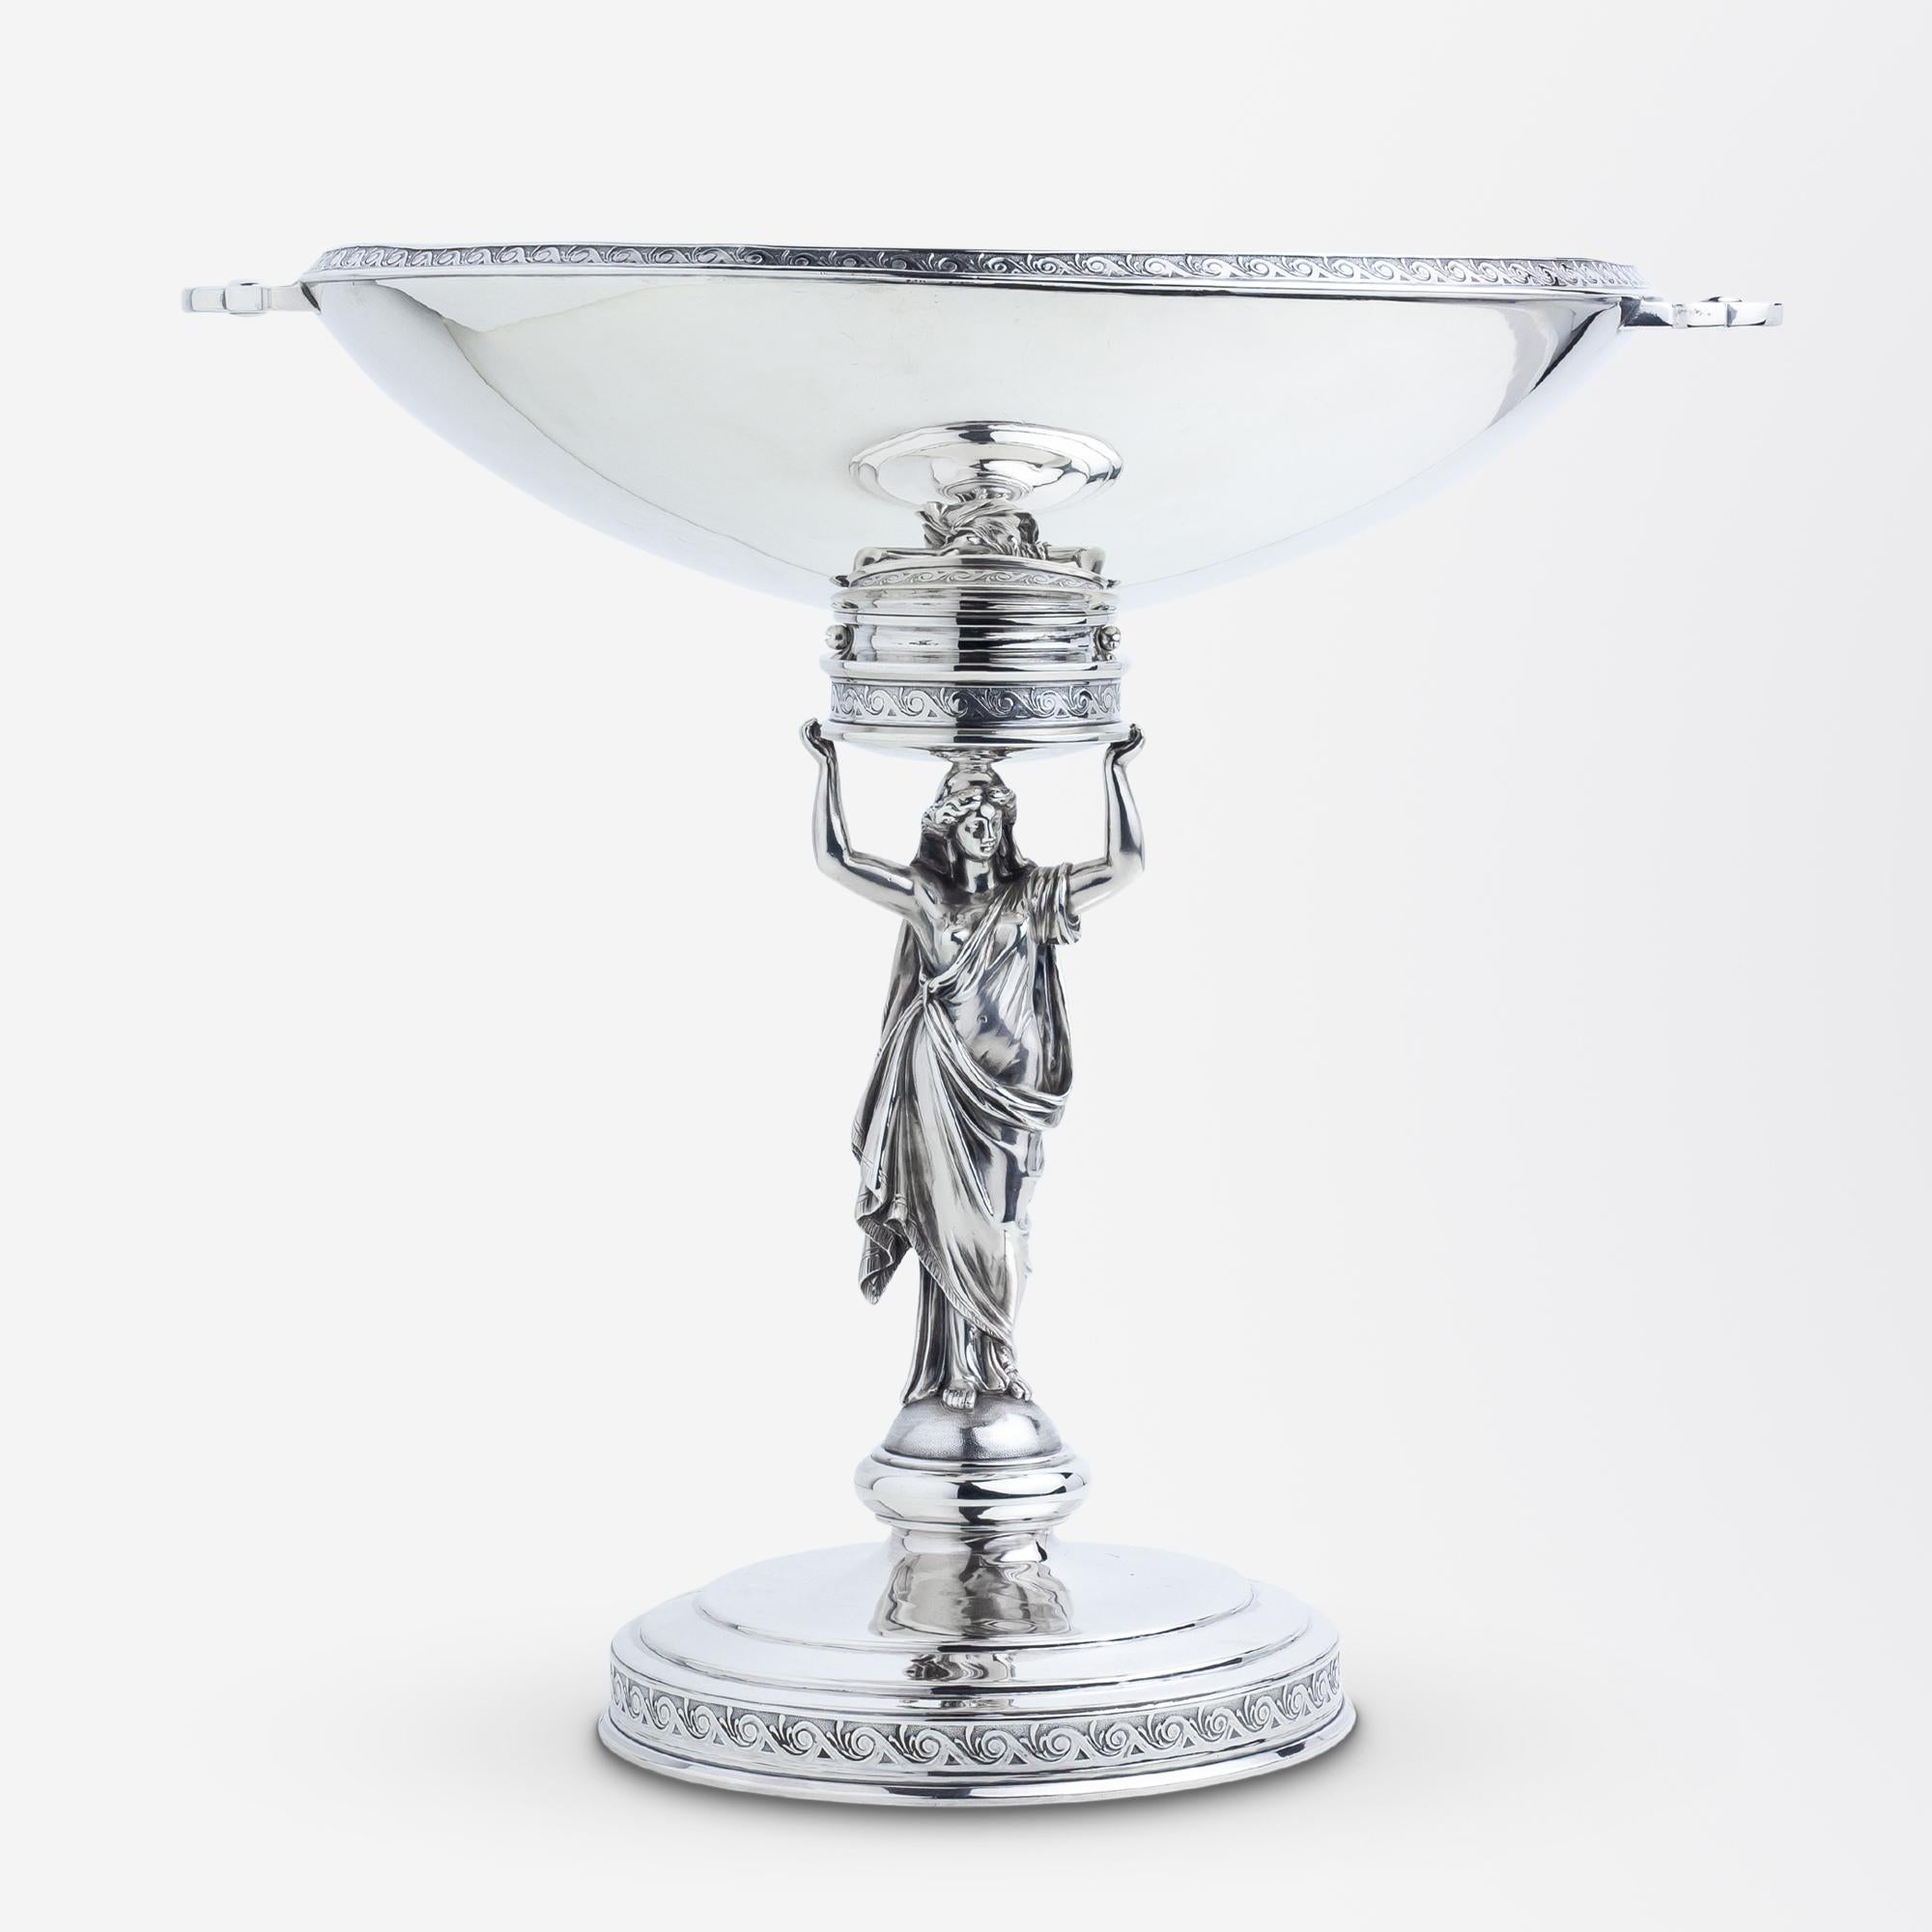 This rather glorious sterling silver tazza or footed comport was likely made by John R. Wendt in the 1870s. The figural piece features a stepped circular base which is topped by a classical figure of a woman in a robe which is holding atop of her